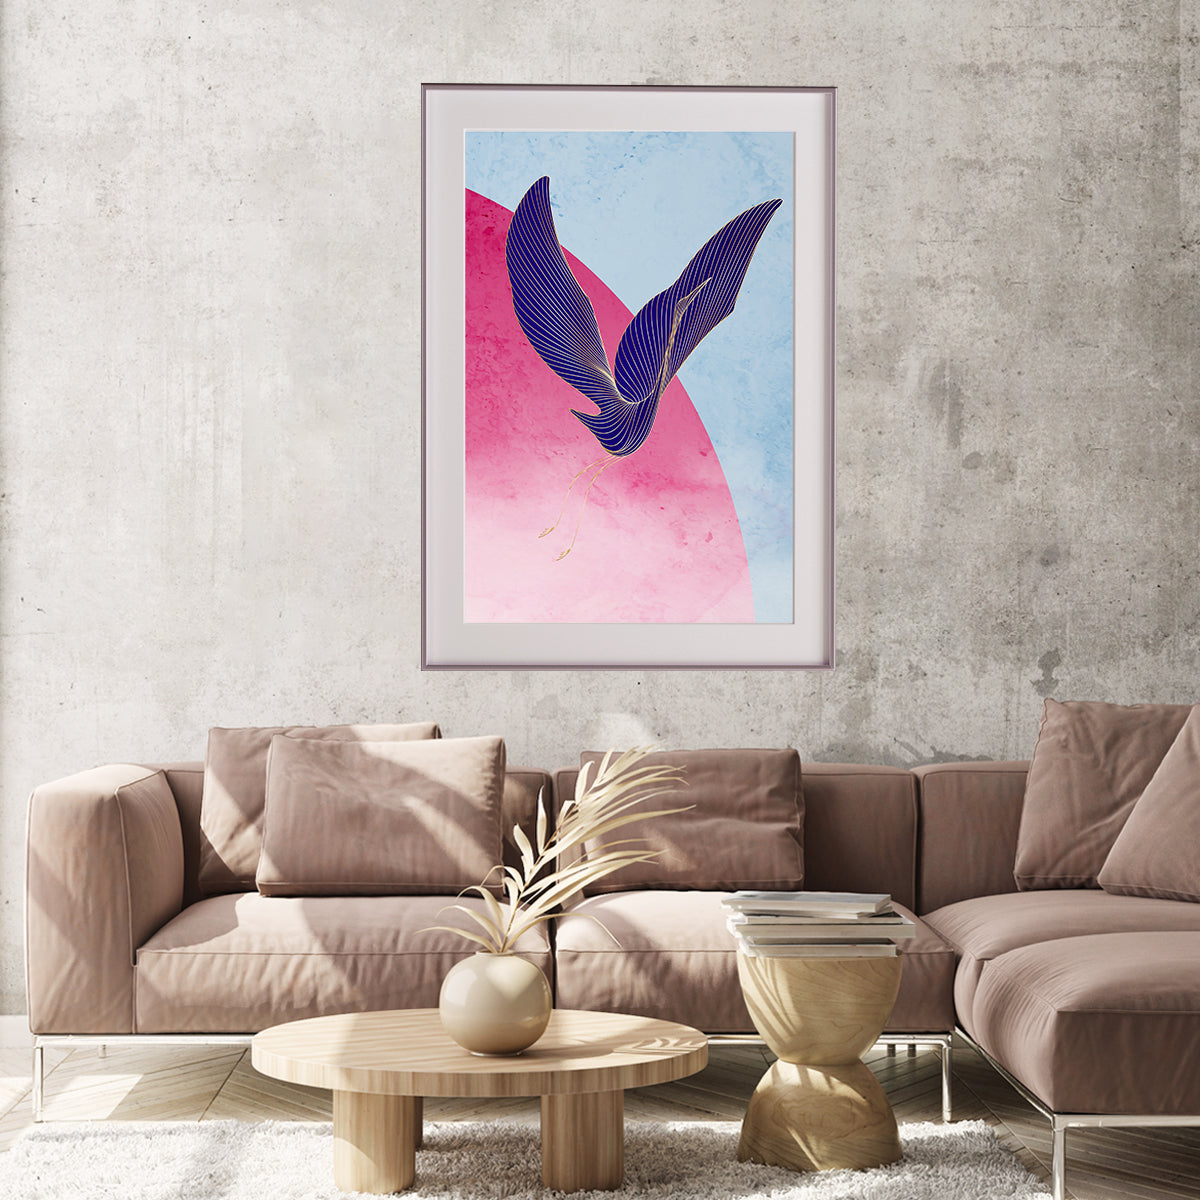 Abstract Japanese Crane Posters Prints Wall Decor-Vertical Posters NOT FRAMED-CetArt-8″x10″ inches-CetArt